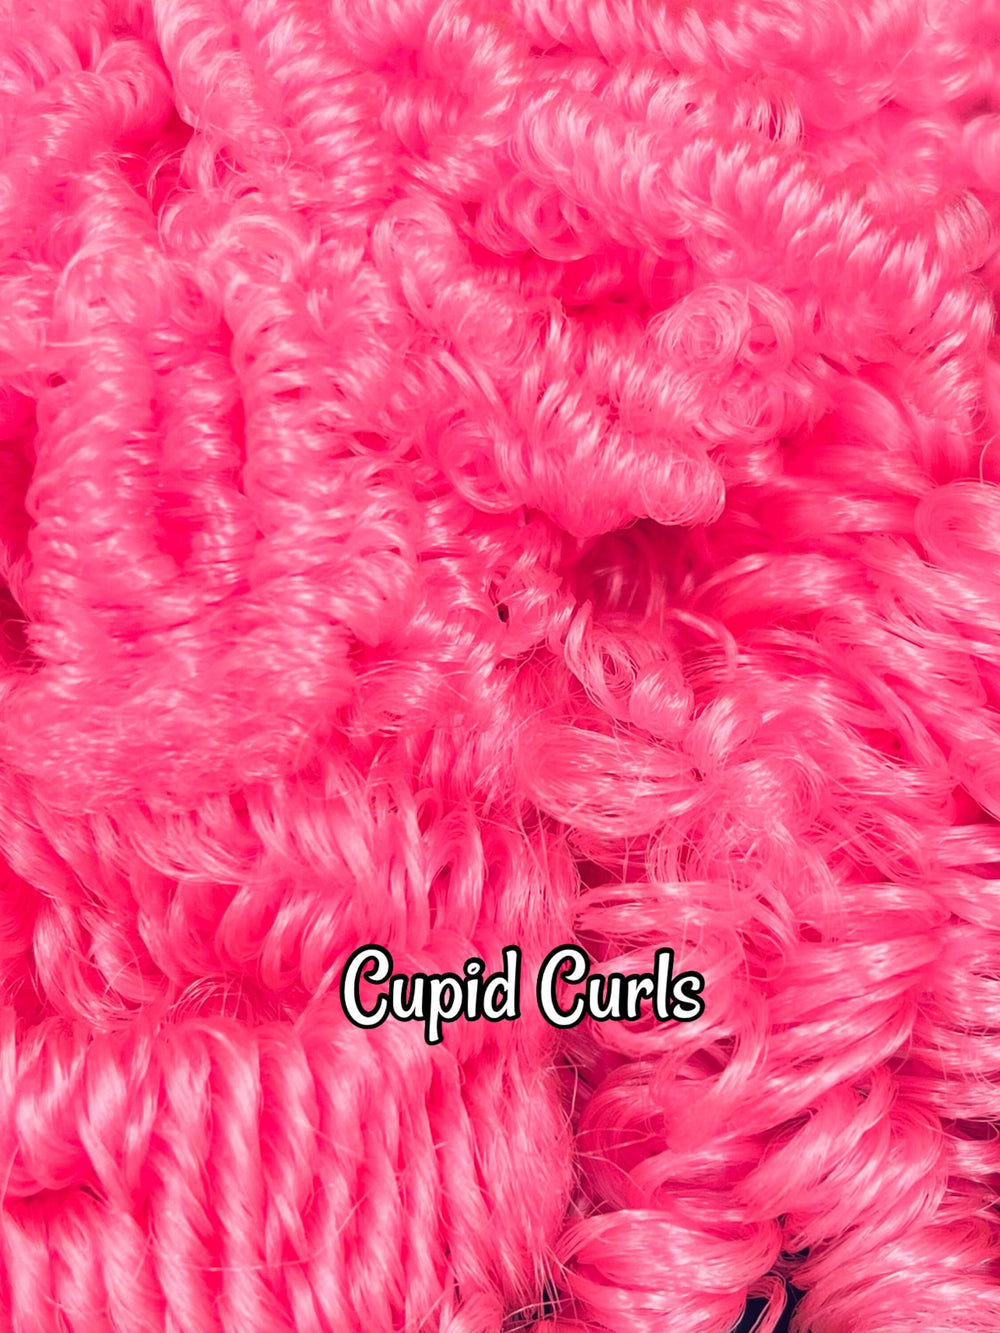 DG Curly Cupid NH3122 pink 36 inch 0.5oz/14g pre-curled Nylon Doll Hair for rerooting fashion dolls Standard Temperature